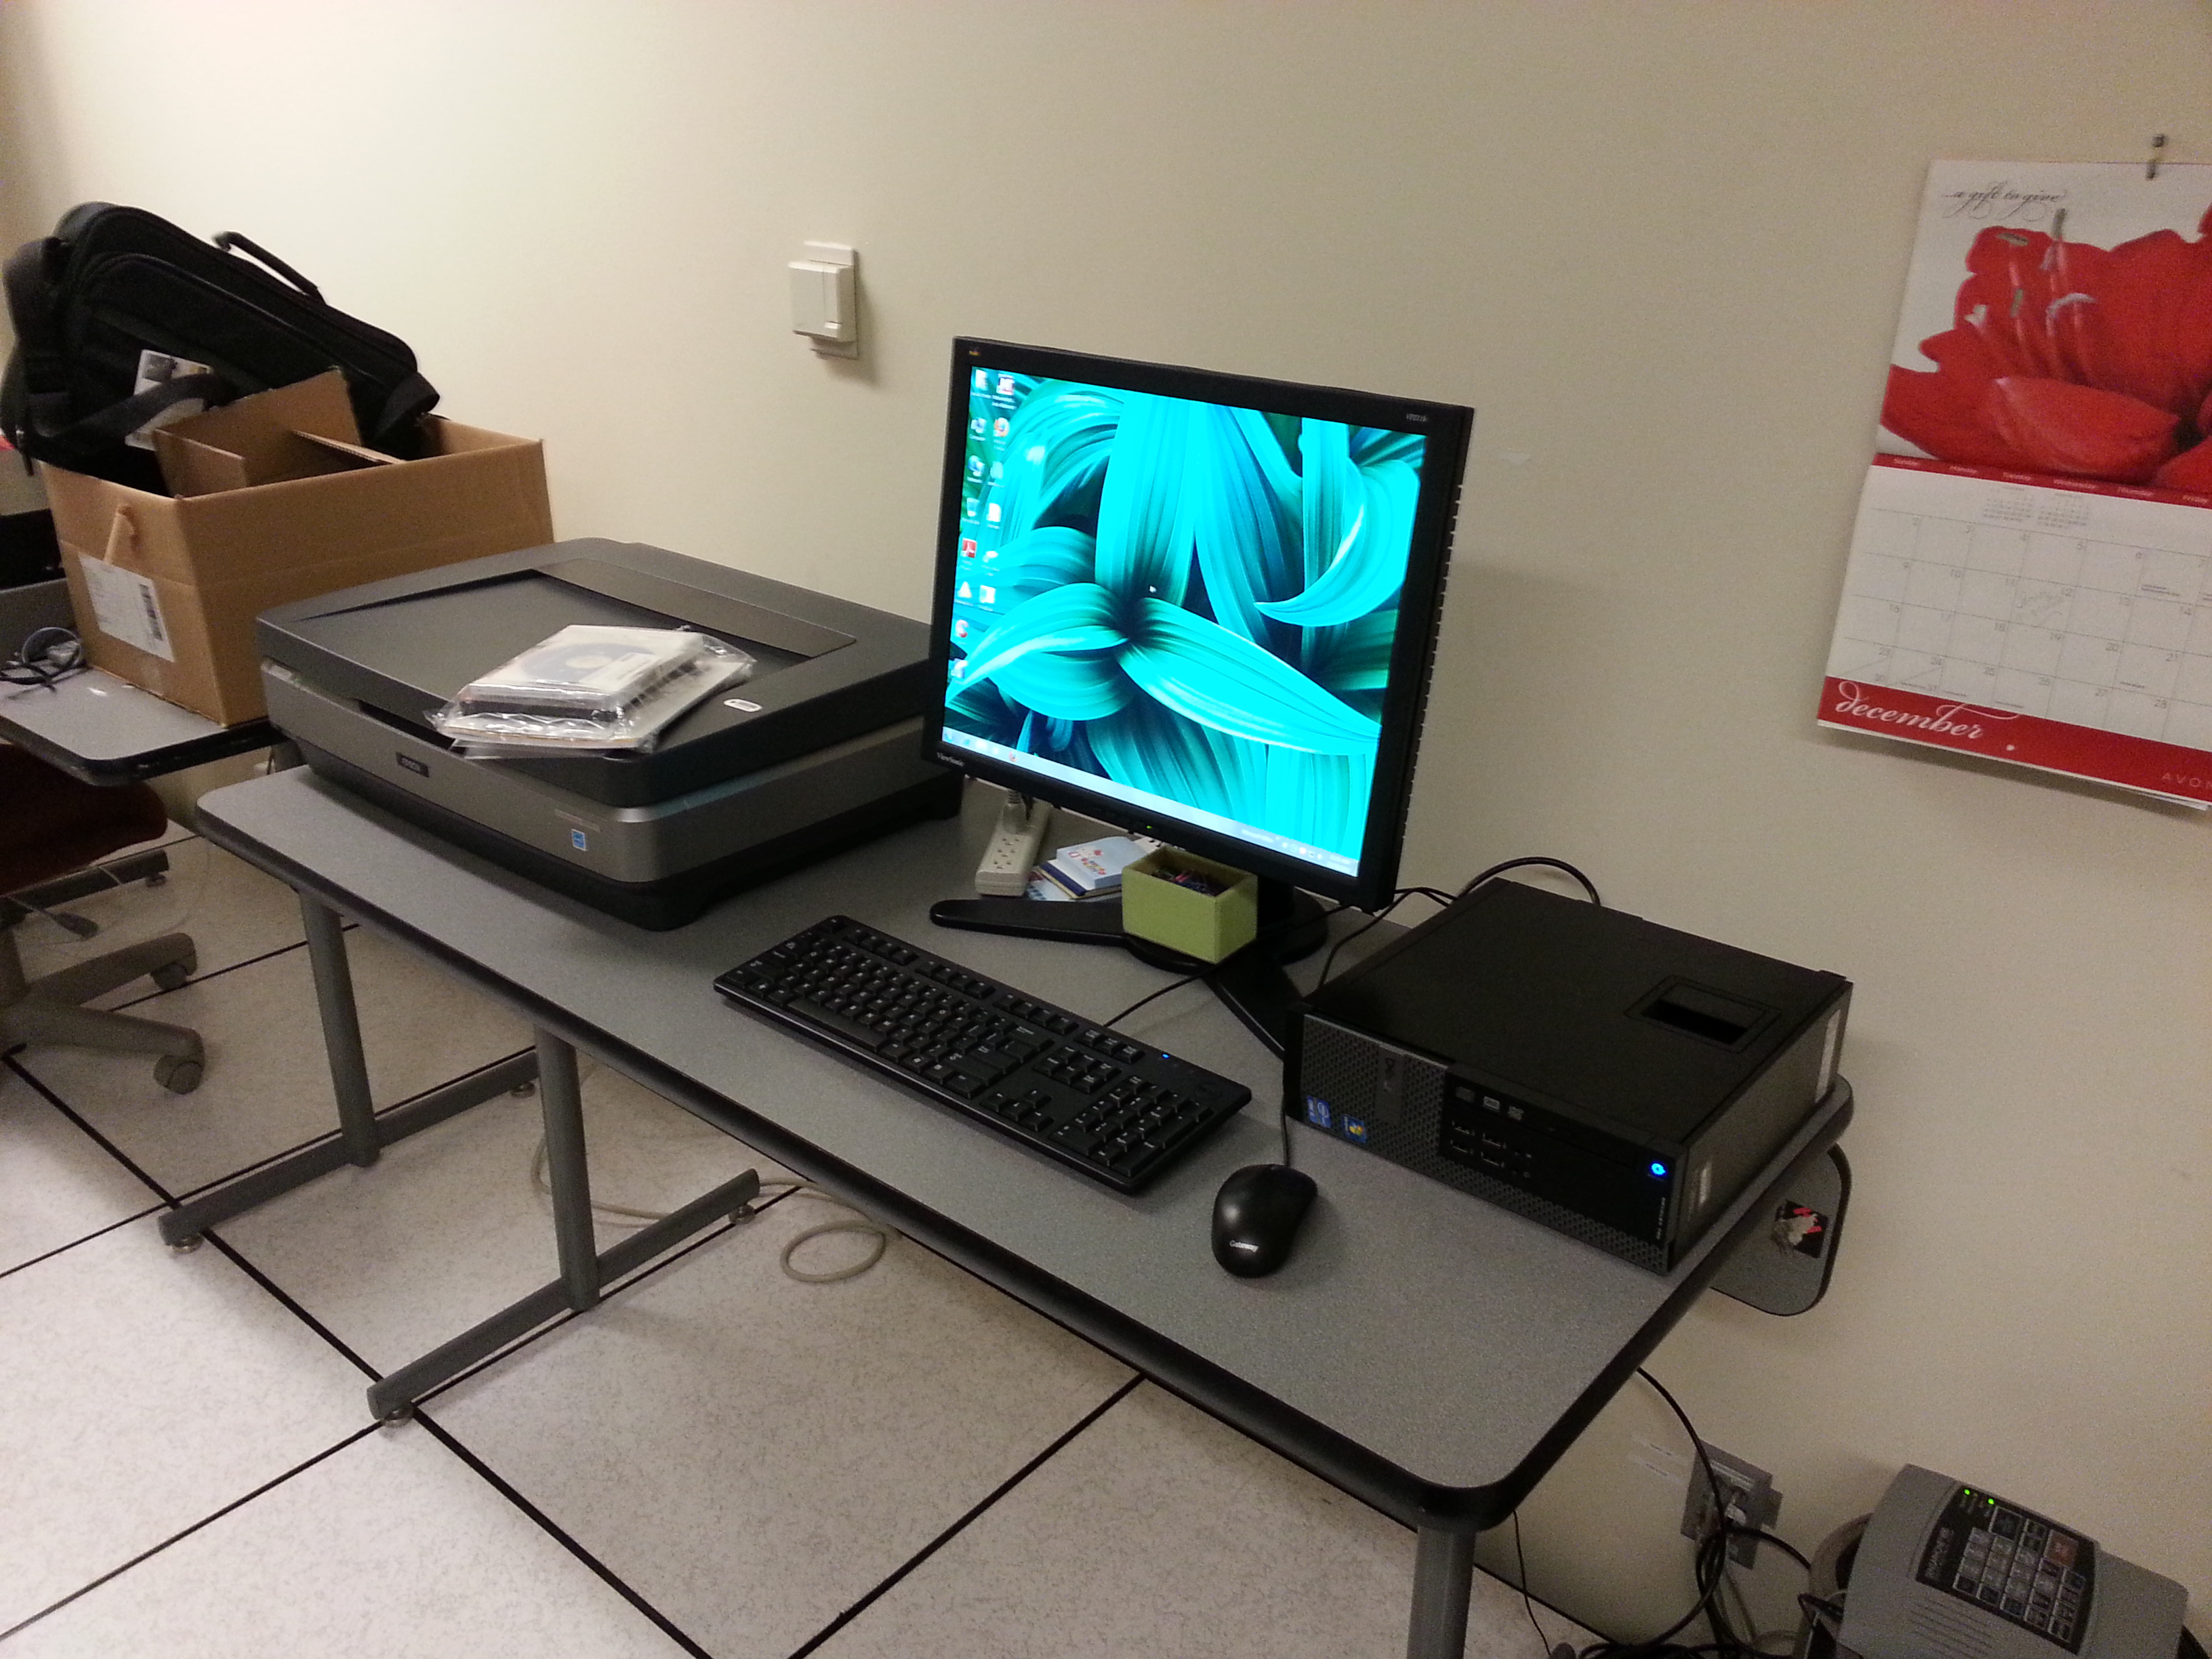 Our new scanning station!